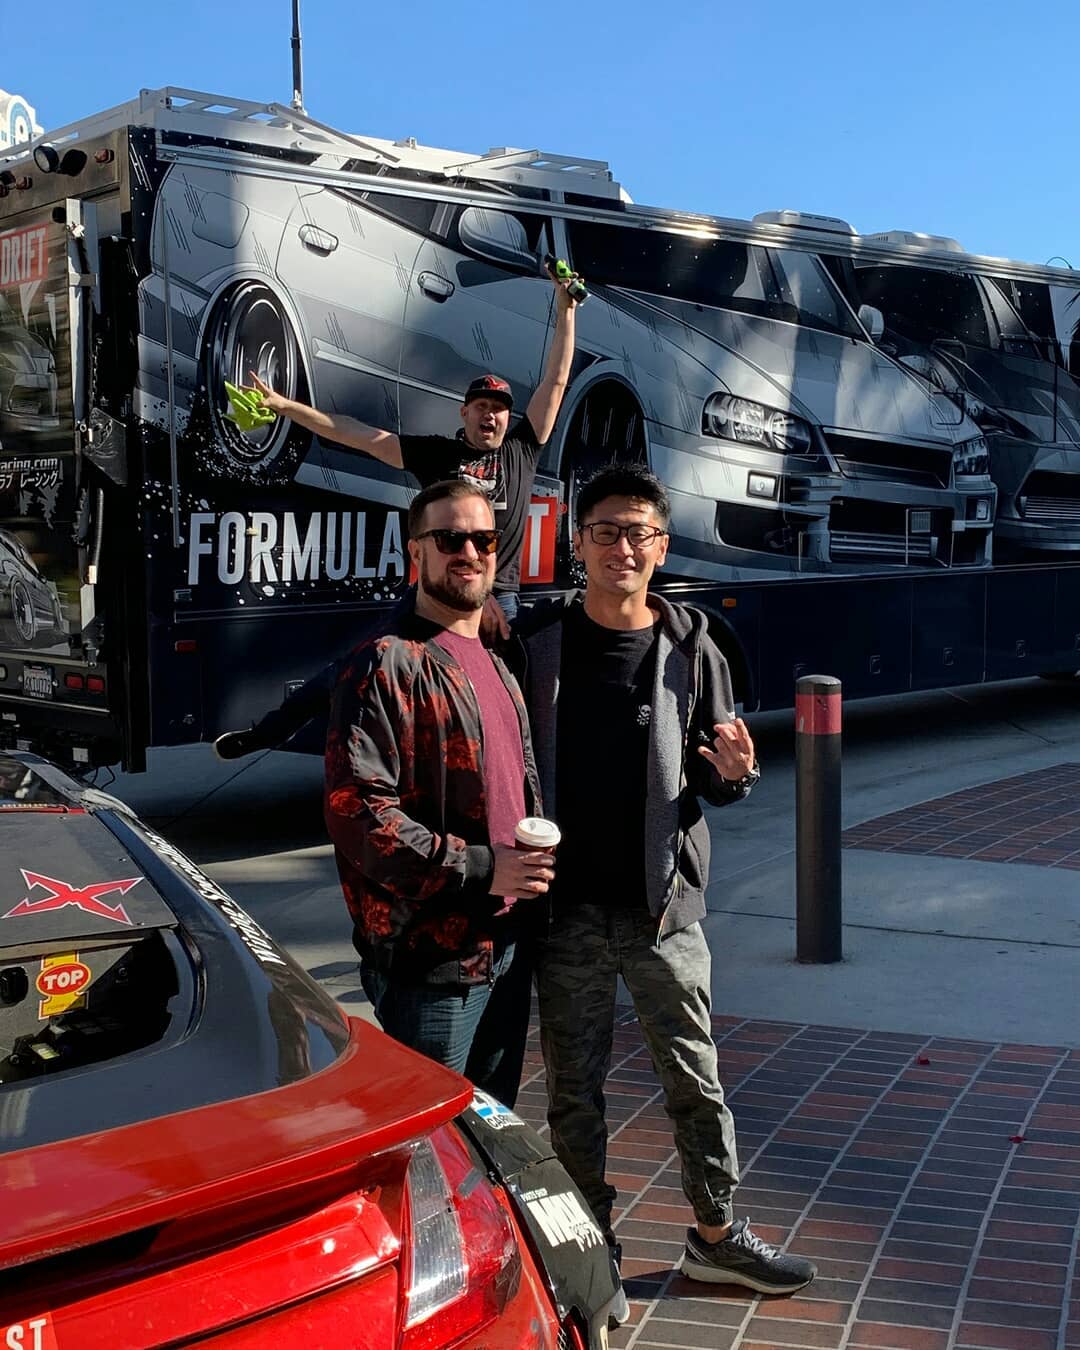 Thank you all who came out to Donut Day today to hang out & have some Donuts with @kengushi,  @jeffjonesracing & @ryanlitteral

If you didn't get your tickets yet, they officially go on sale Monday Dec 17th - 12PM PST: (link in bio)